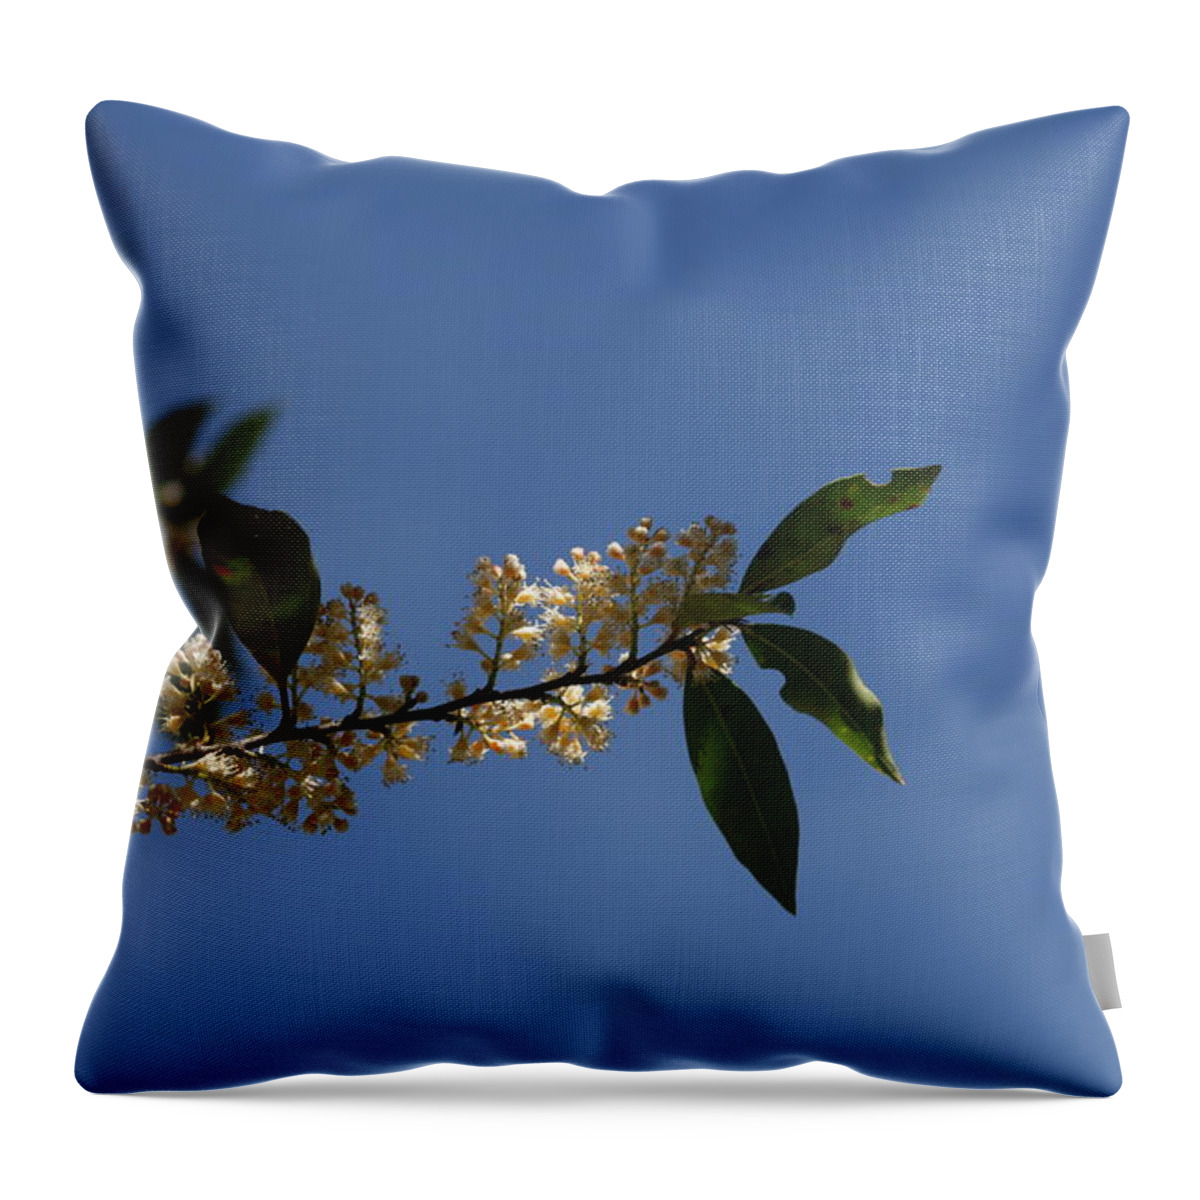 Flowers Throw Pillow featuring the photograph Springtime 2019 by Cathy Harper